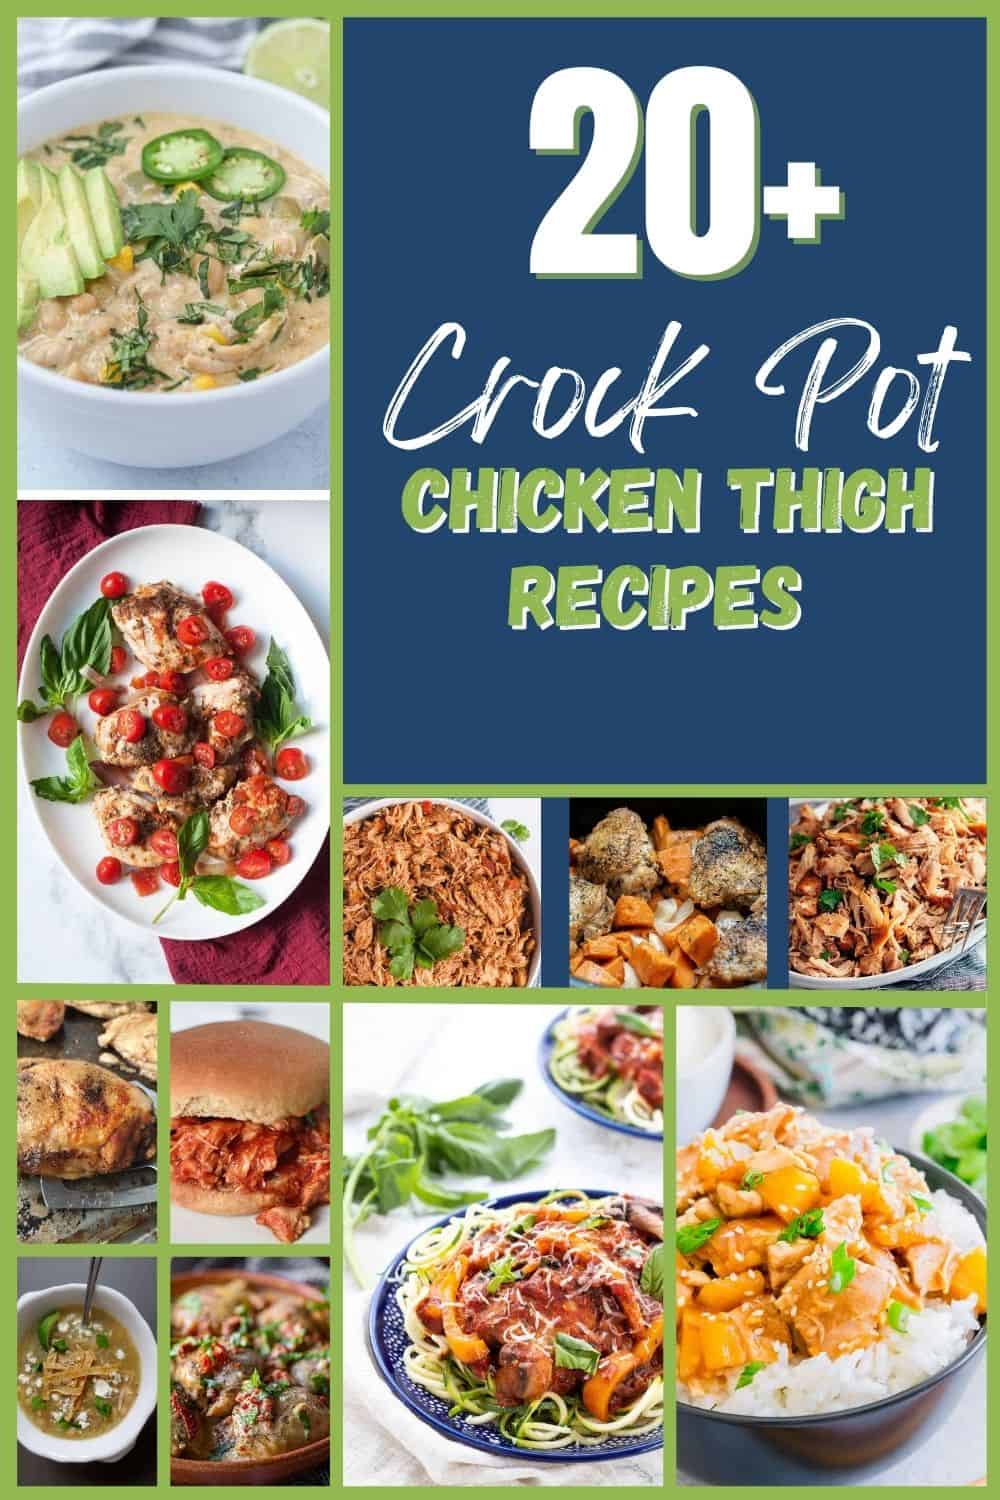 Pin showing images of crock pot chicken thigh recipes